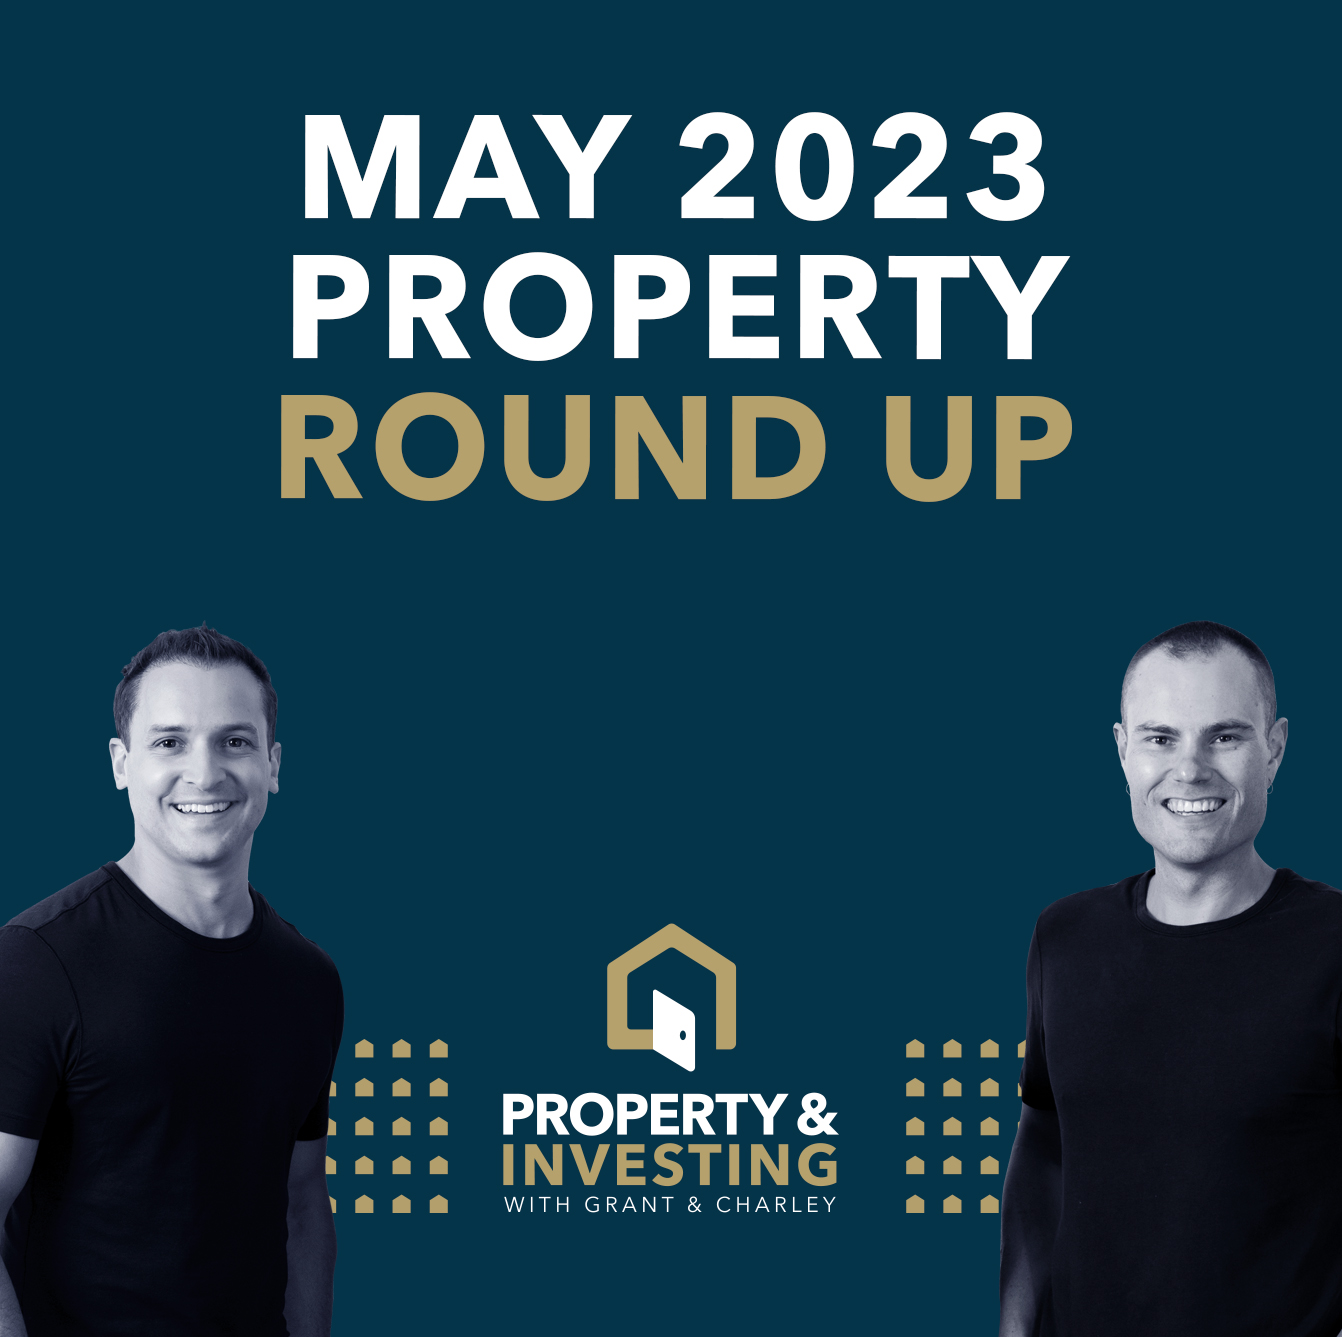 May 2023 Property Round Up